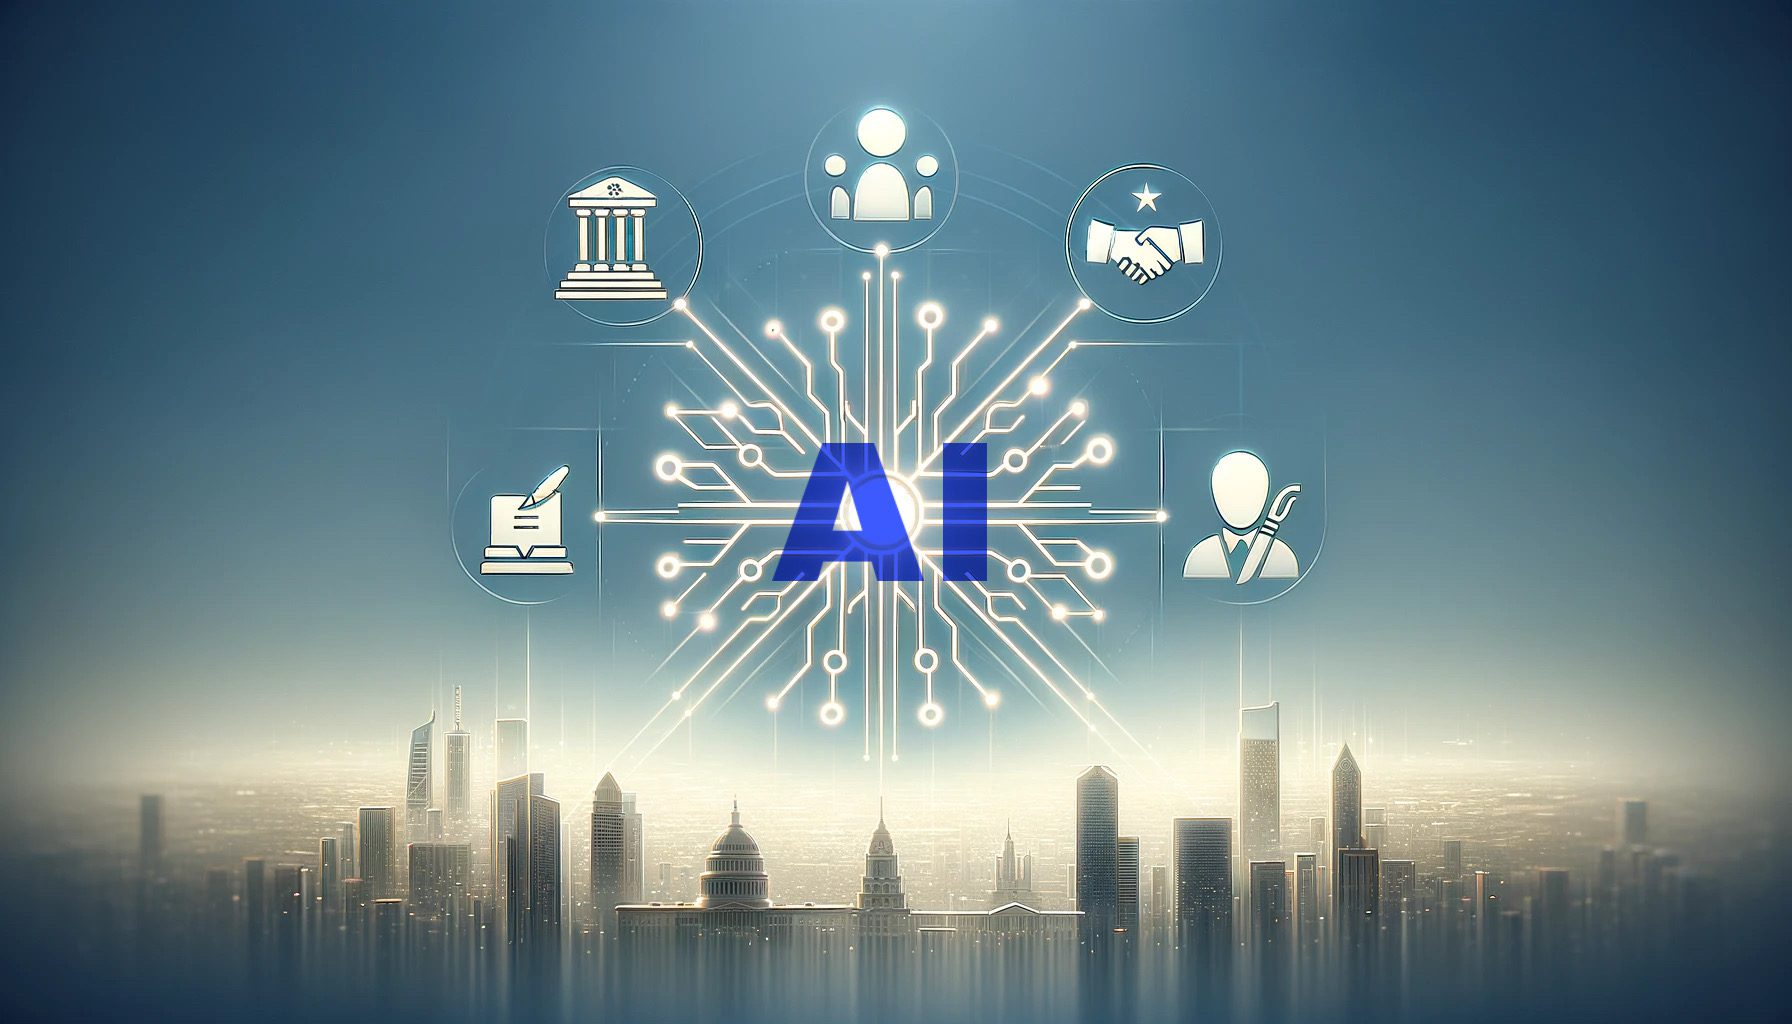 The Strategic Landscape of AI: A Guided Service for Industry Leaders, Decision Makers, and Federal Agencies